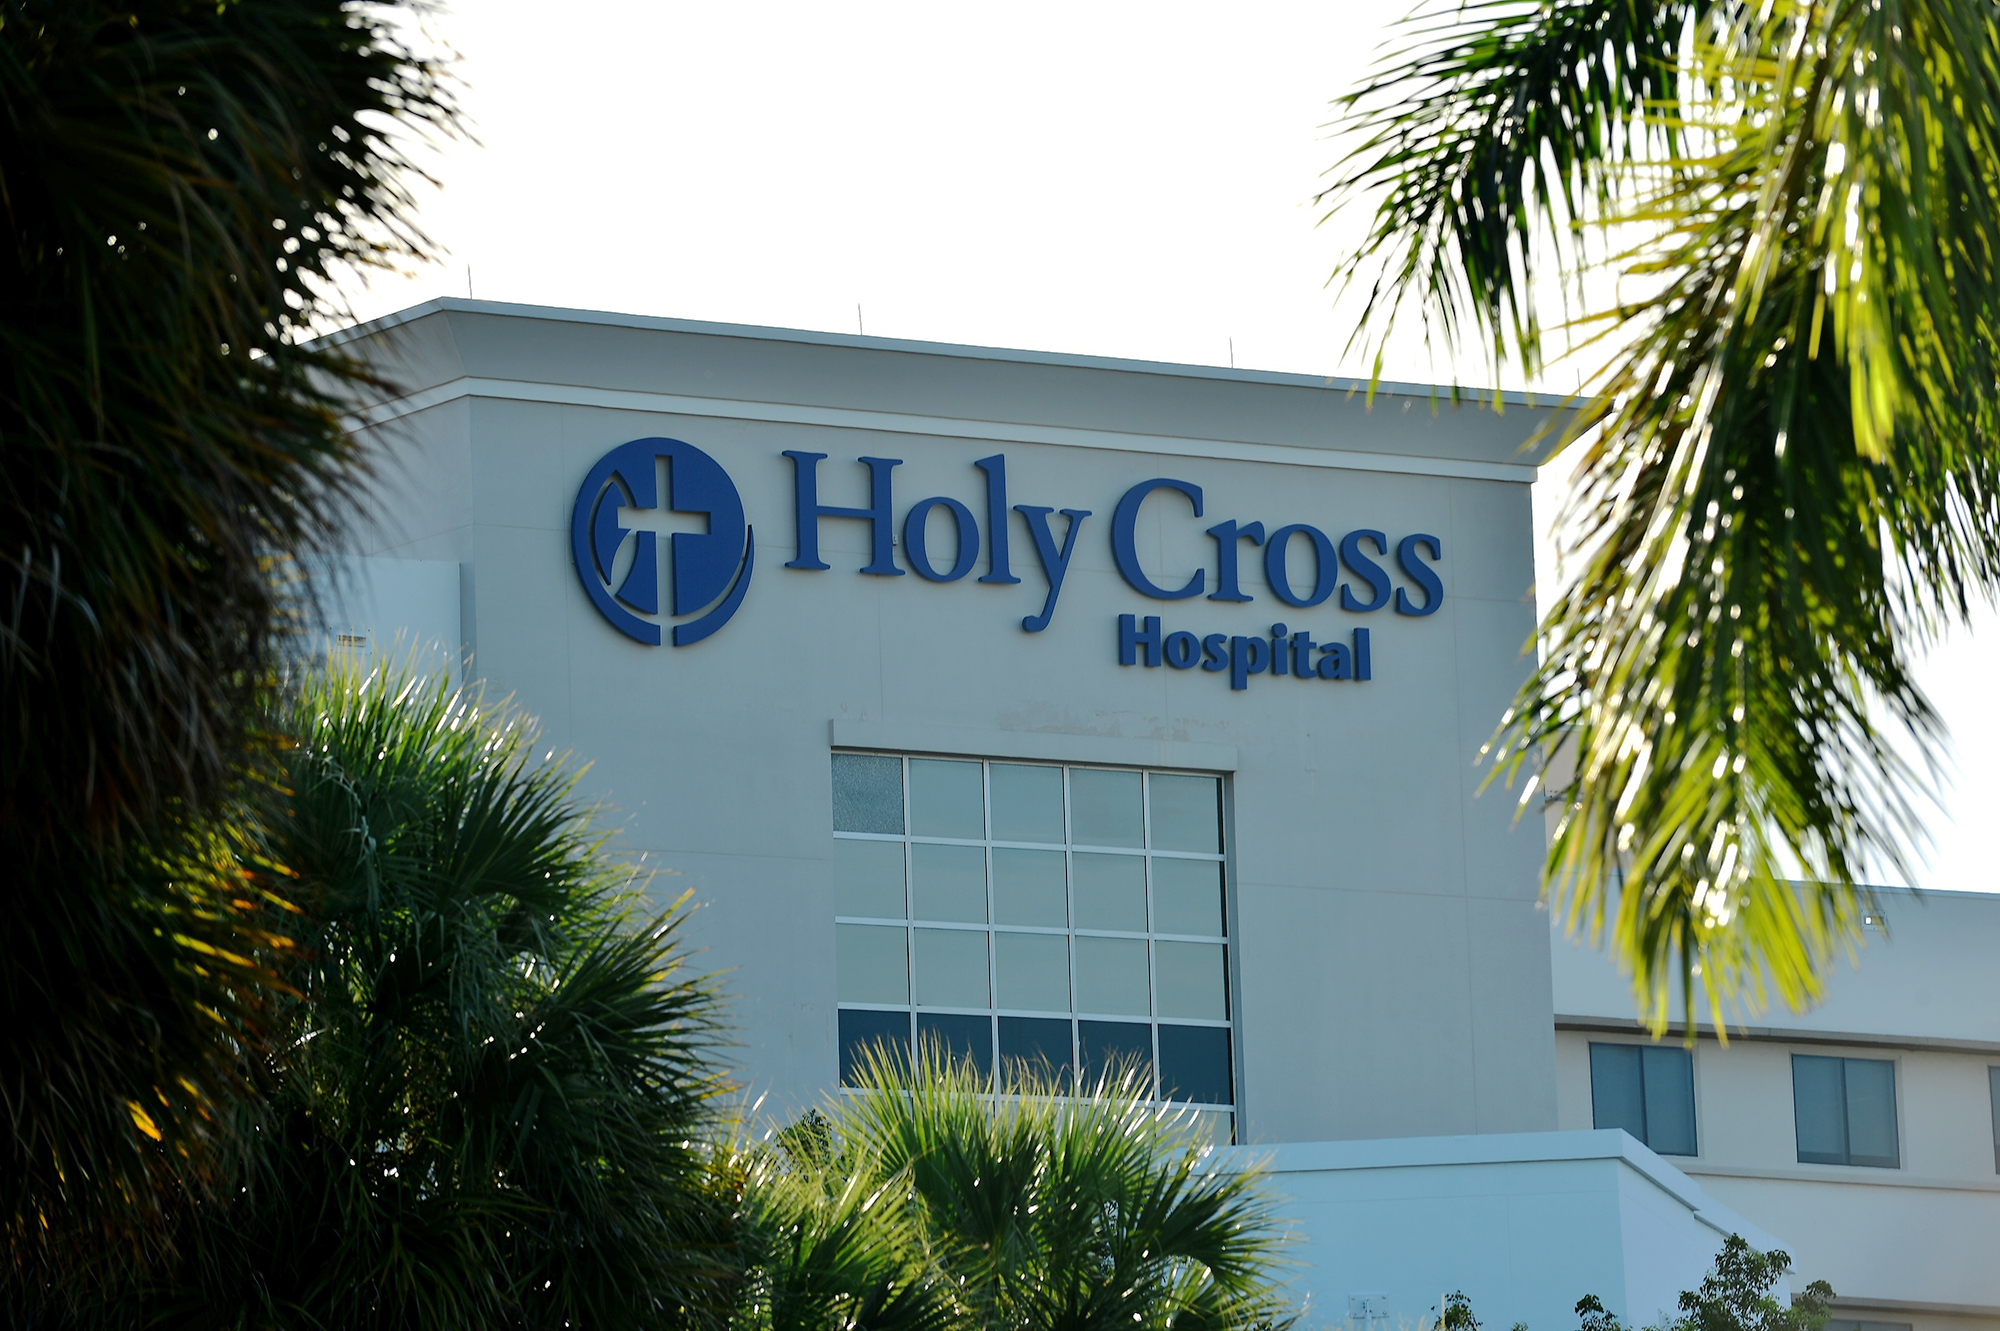 PHOTO: An exterior view shows Holy Cross Hospital in Fort Lauderdale, Fla., July 29, 2020.